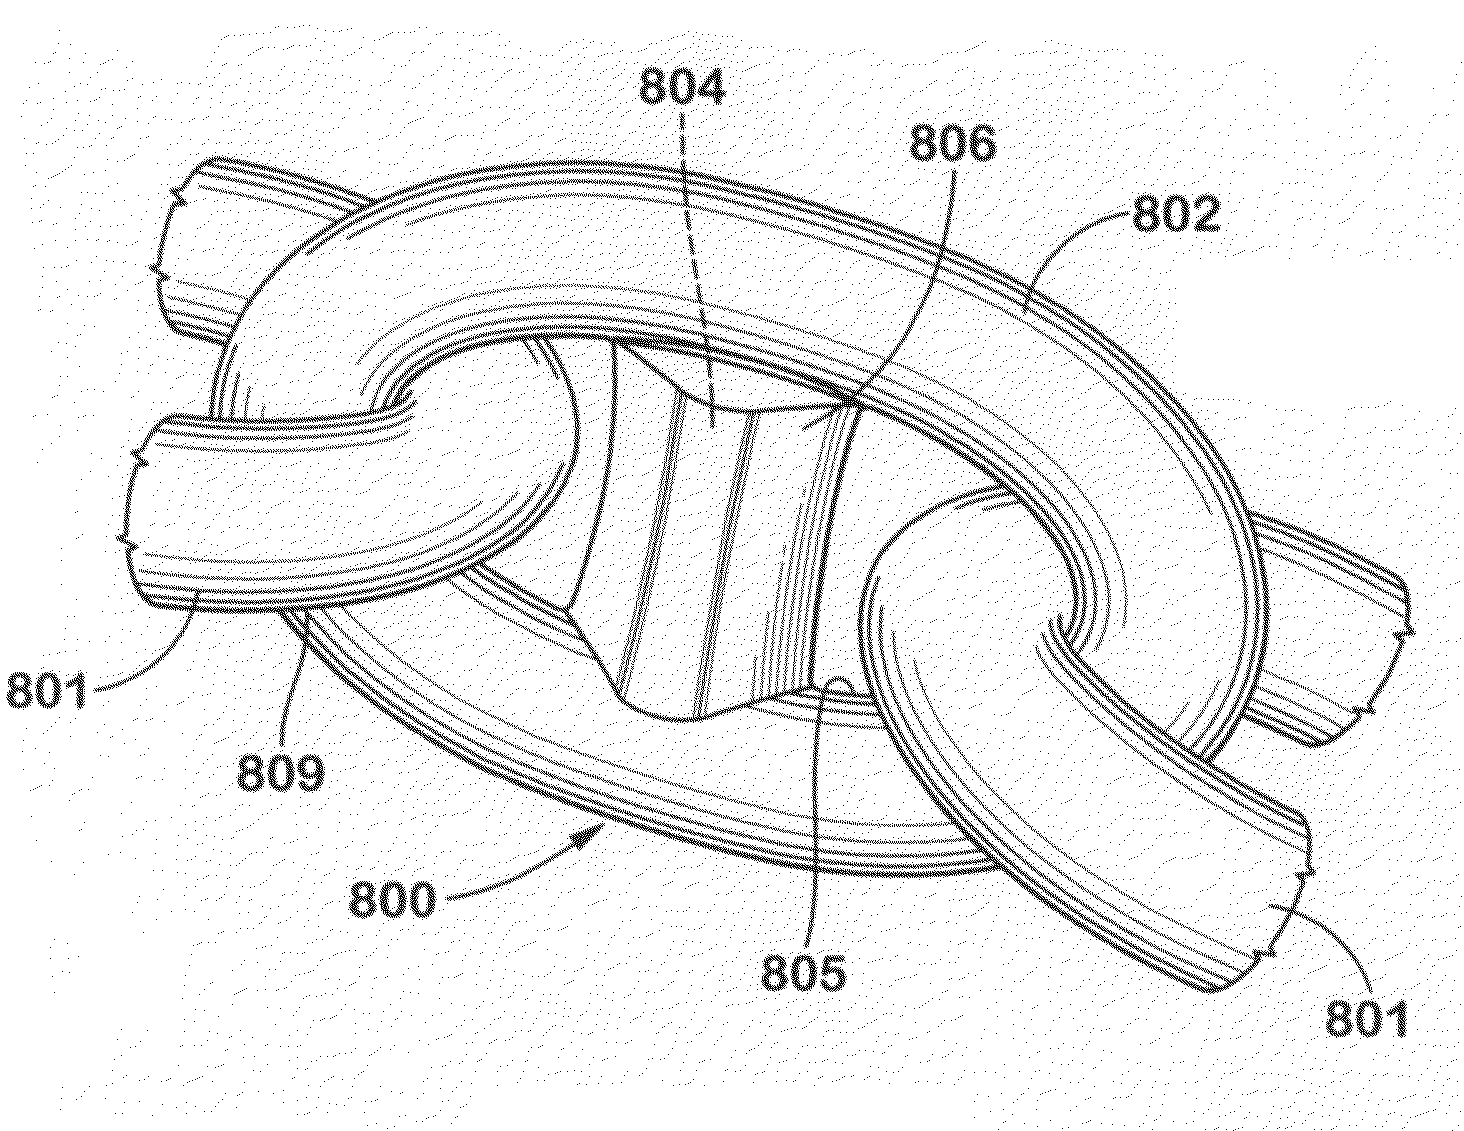 Chain with identification apparatus